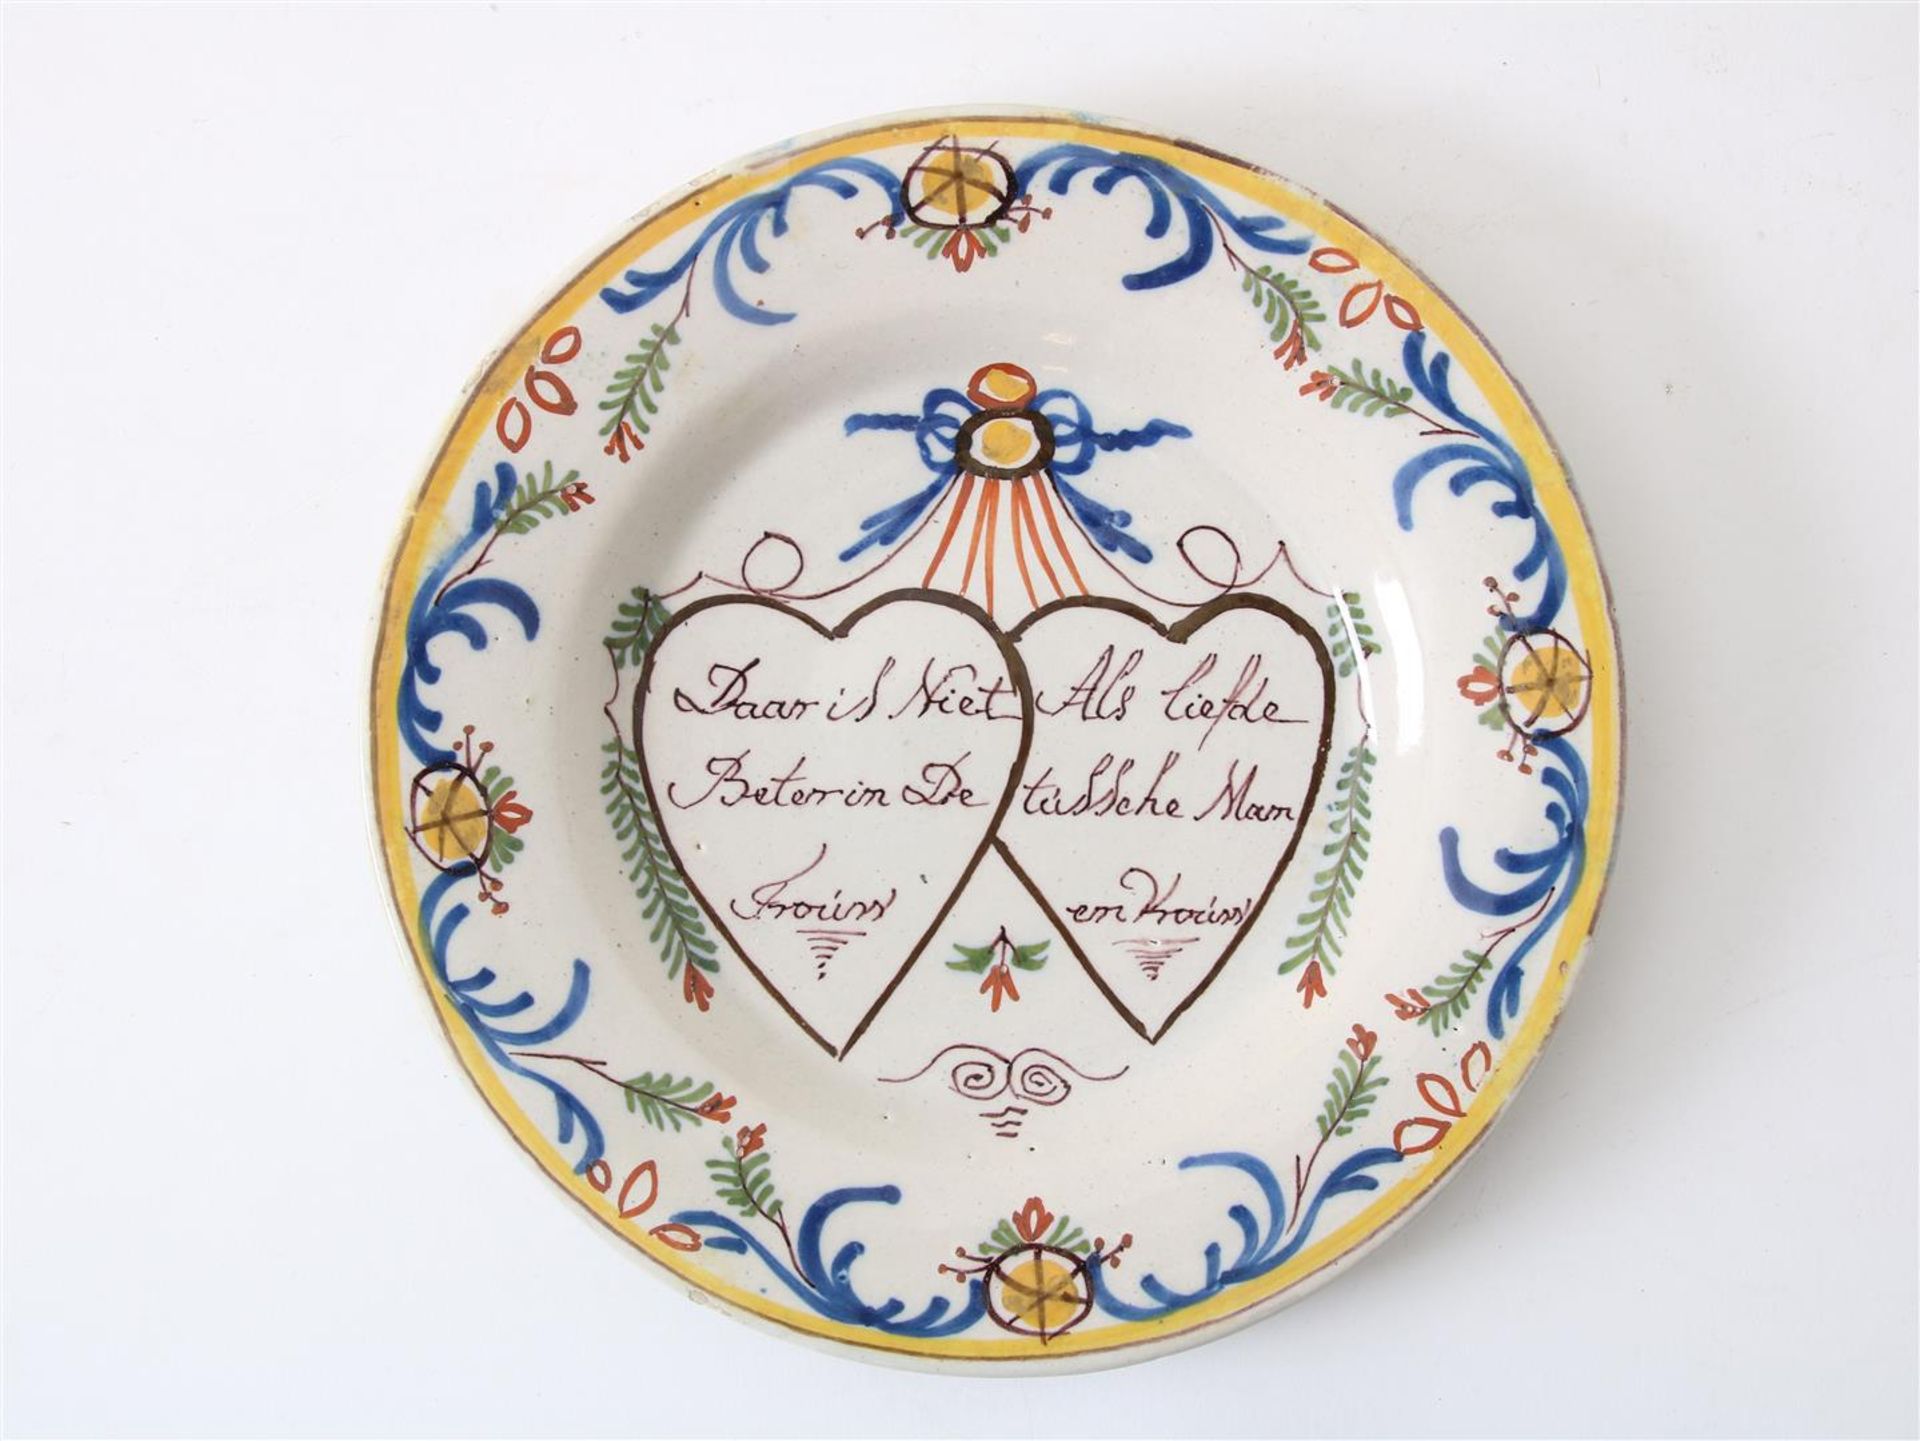 Lot consisting of: plate with polychrome floral decor and text in two hearts: "There is nothing - Image 3 of 7